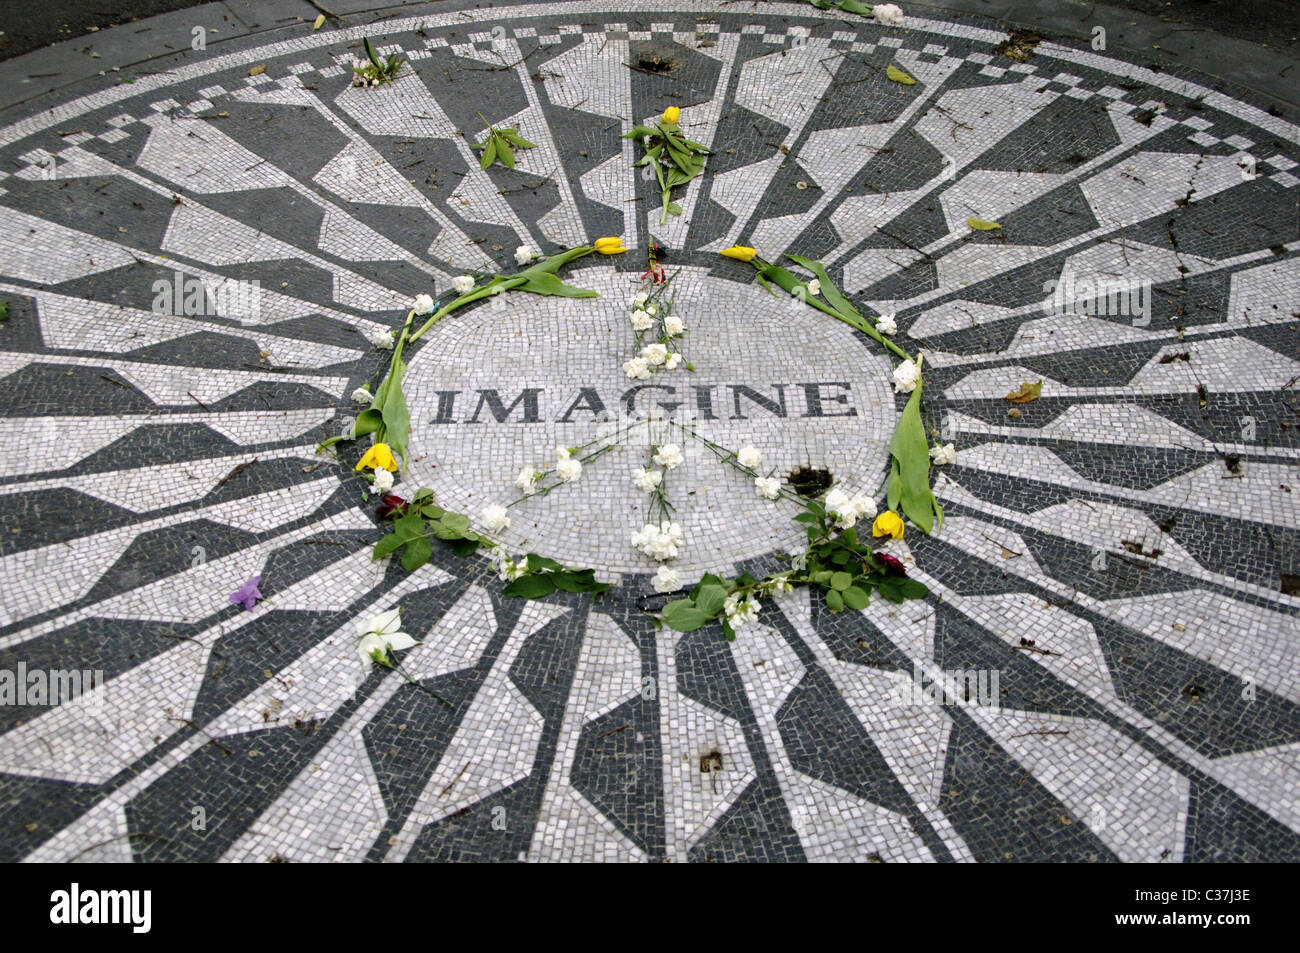 United States. New York. Central Park. Strawberry Fields. Dedicated to the memory of John Lennon. Memorial mosaic. Imagine. Stock Photo